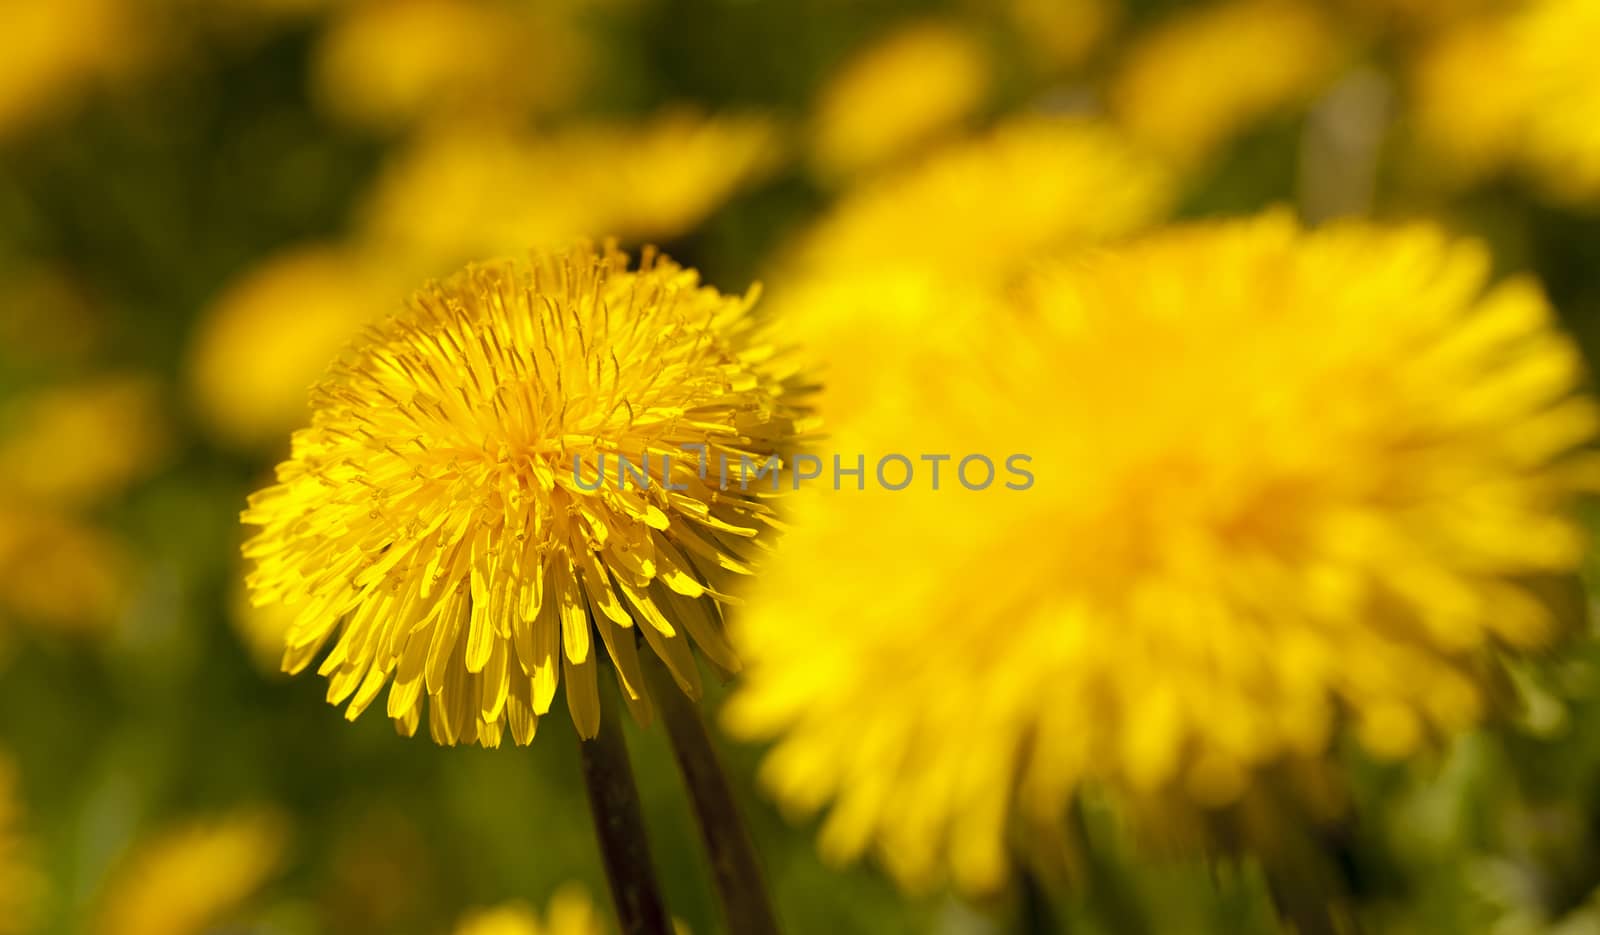   photographed by a close up yellow flowers of a dandelion.